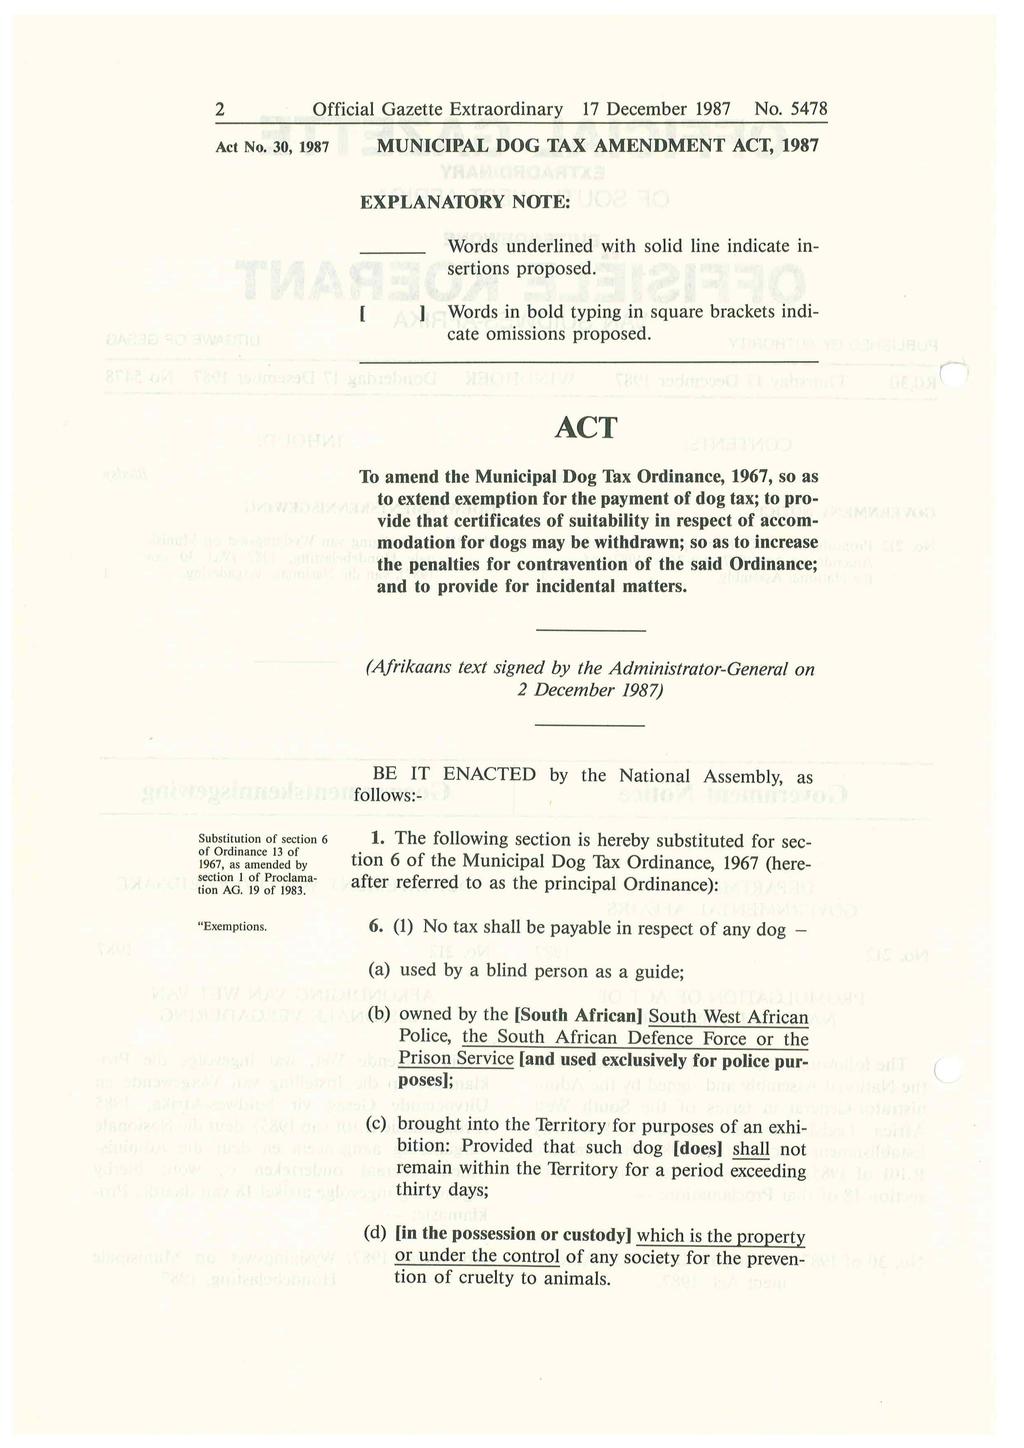 2 Official Gazette Extraordinary 17 December 1987 No. 5478 Act No. 30, 1987 MUNICIPAL DOG TAX AMENDMENT ACT, 1987 EXPLANATORY NOfE: Words underlined with solid line indicate insertions proposed.